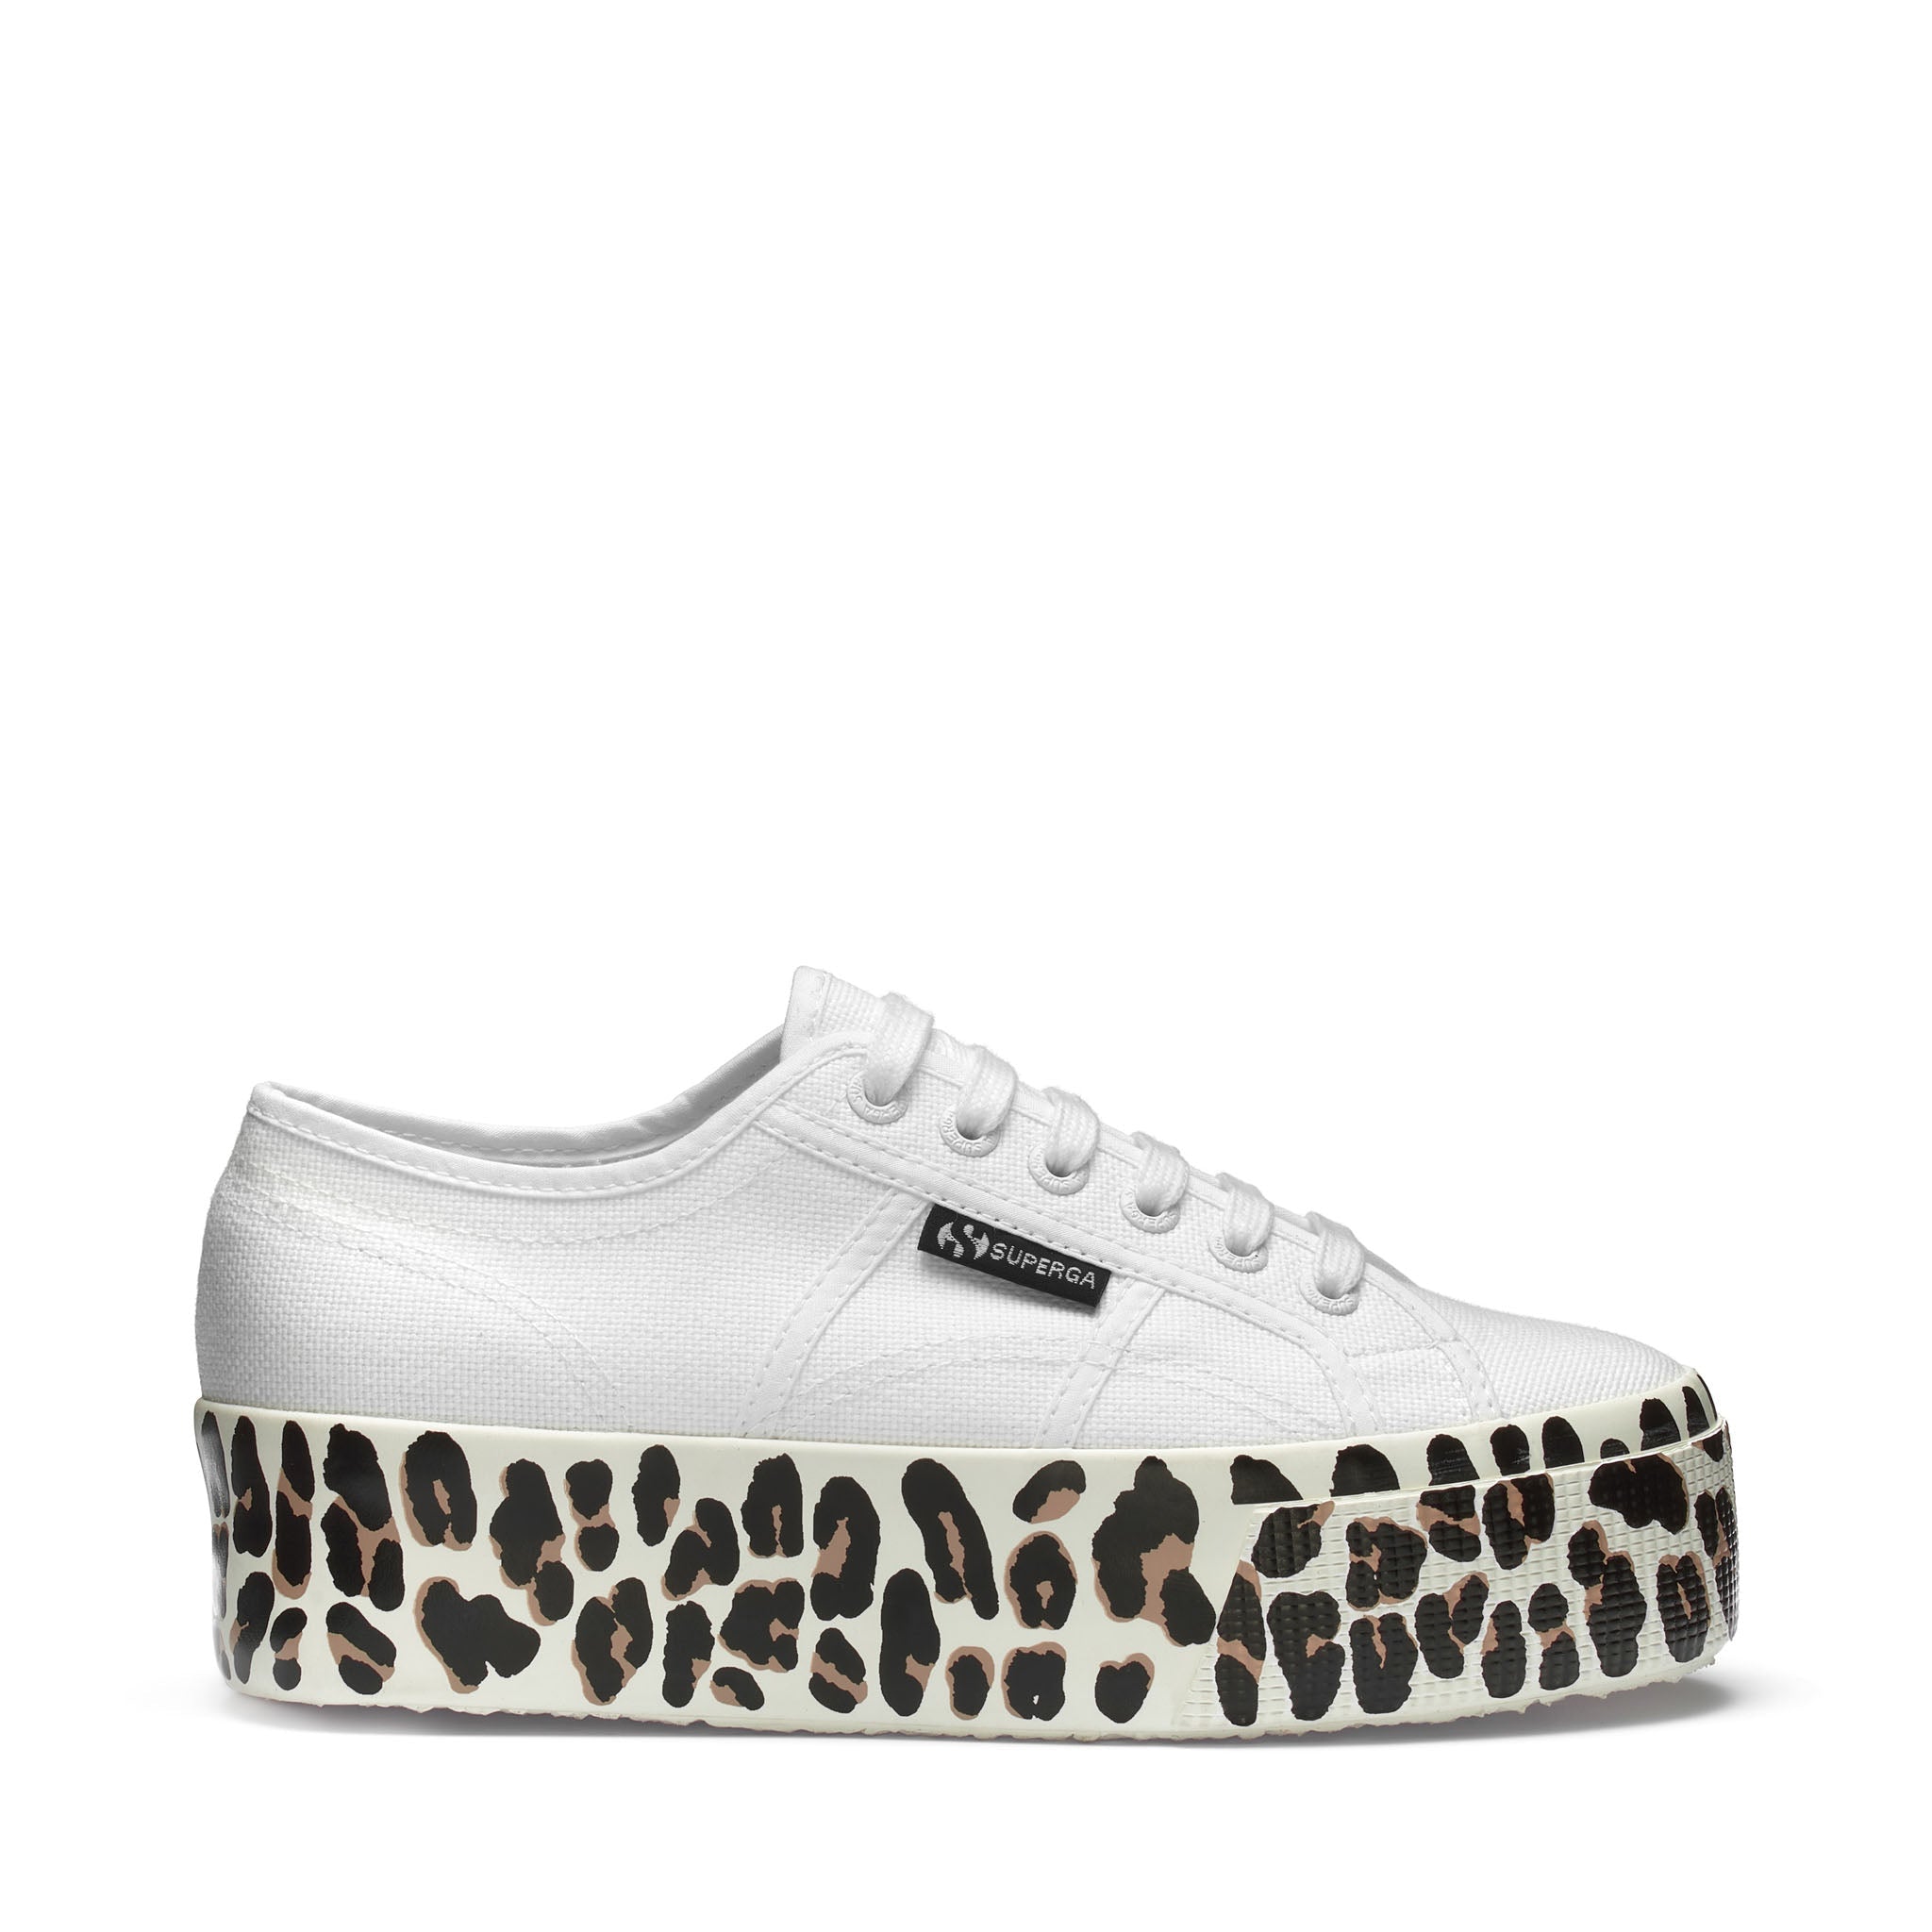 Superga 2790 Light Leopard Foxing Print Sneakers - White. Side view.